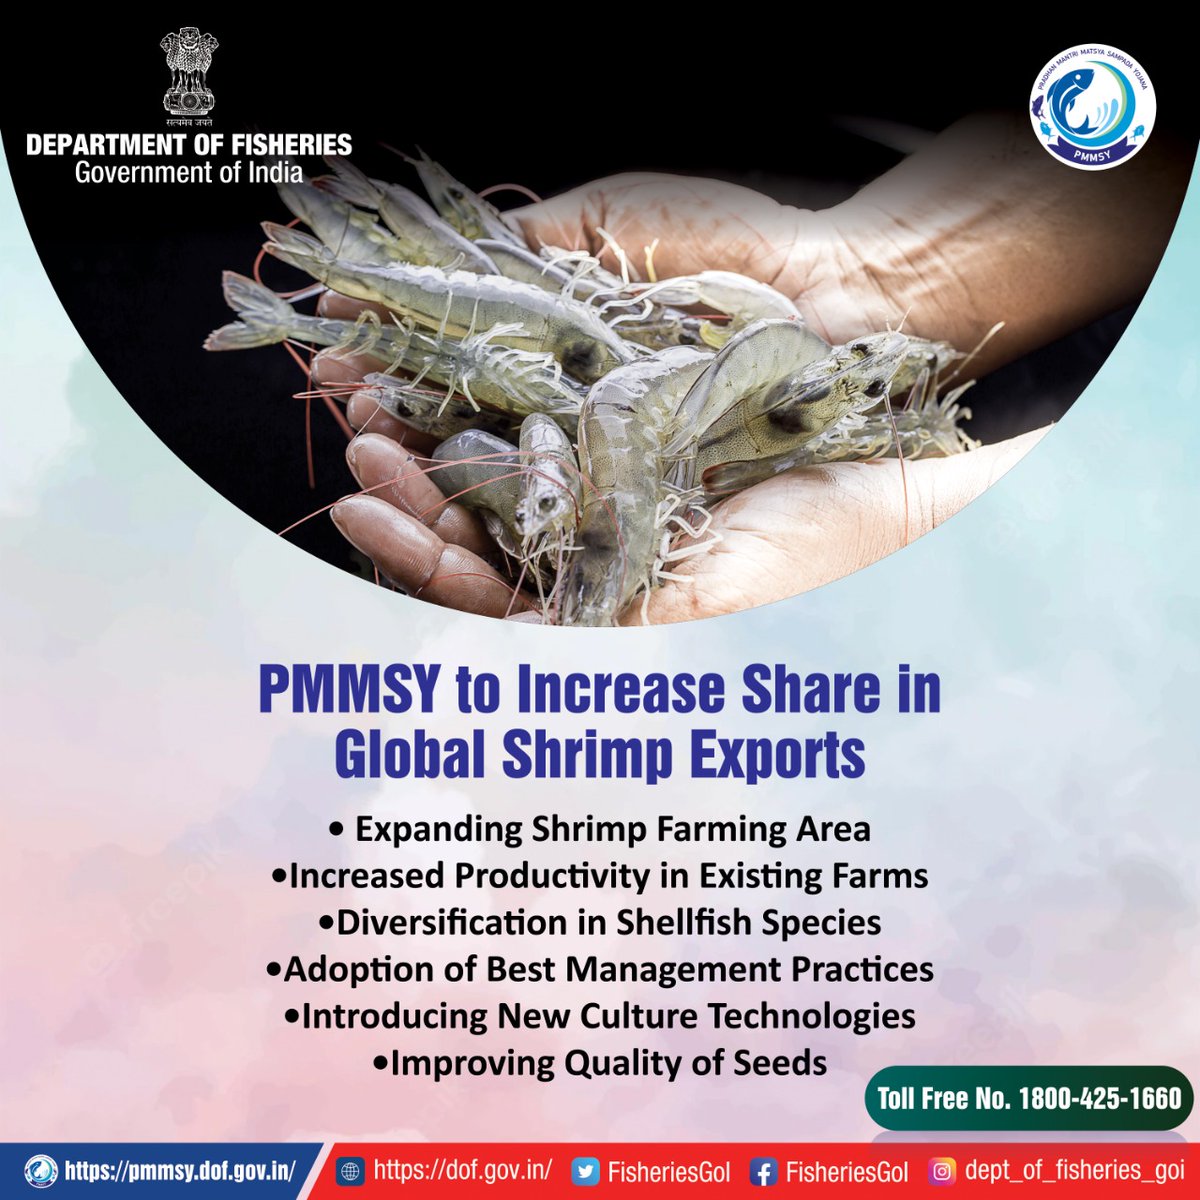 The shrimp industry of India envisions increased share in global shrimp exports. Under #PMMSY growth in shrimp production and exports have been prioritized by undertaking various strategic measures.
#shrimpcultivation #productiongrowth #exports